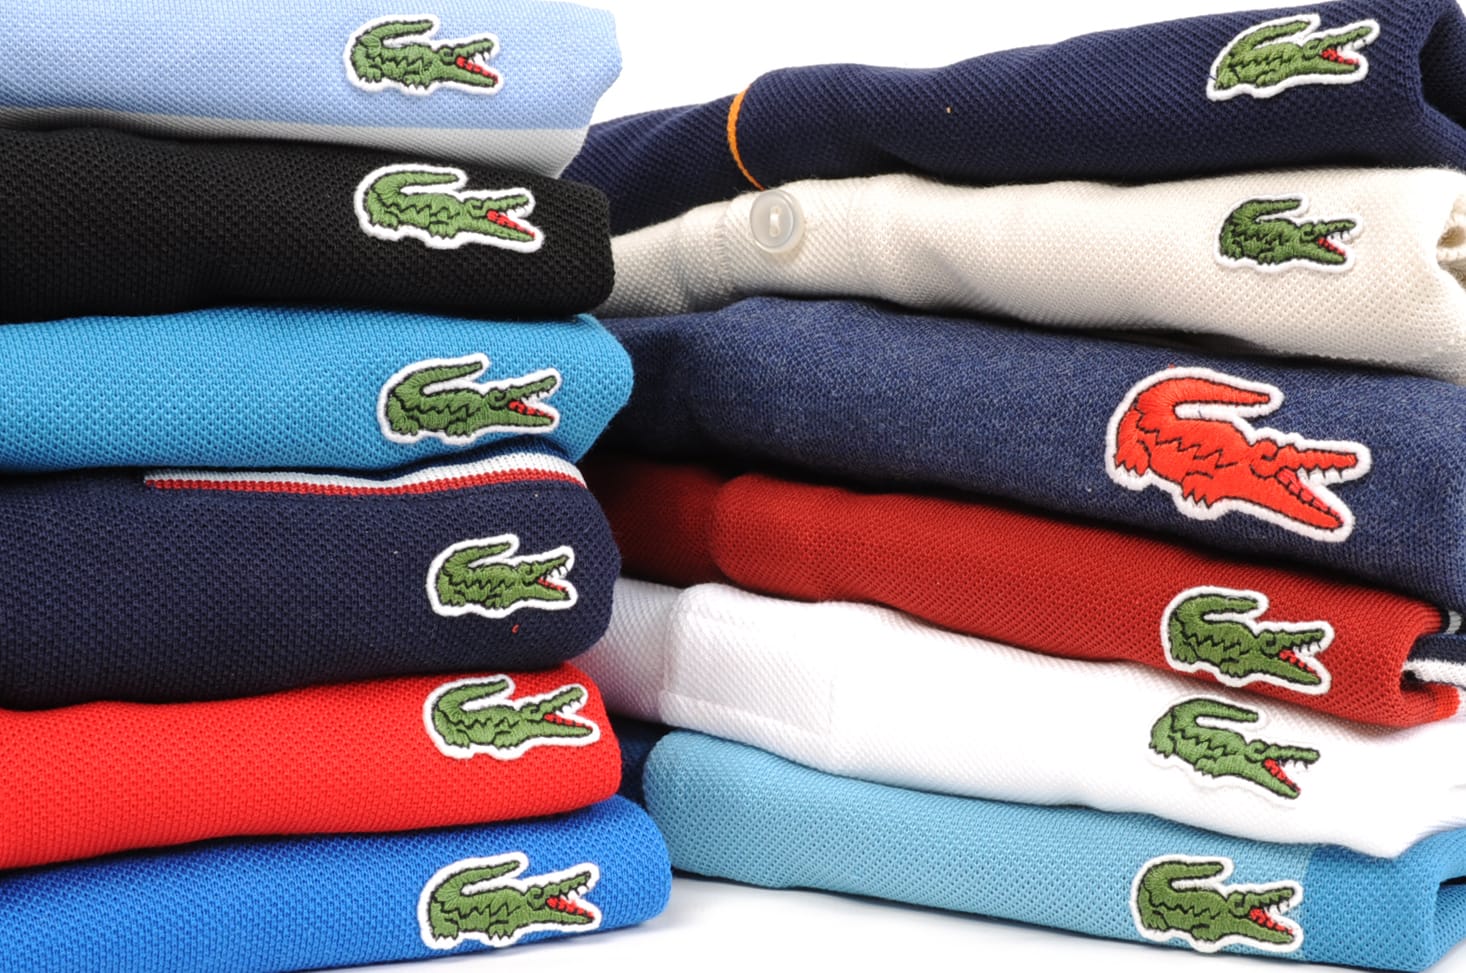 dans fup Manager Lacoste trainers and polo sale | Buy into the history of an iconic brand